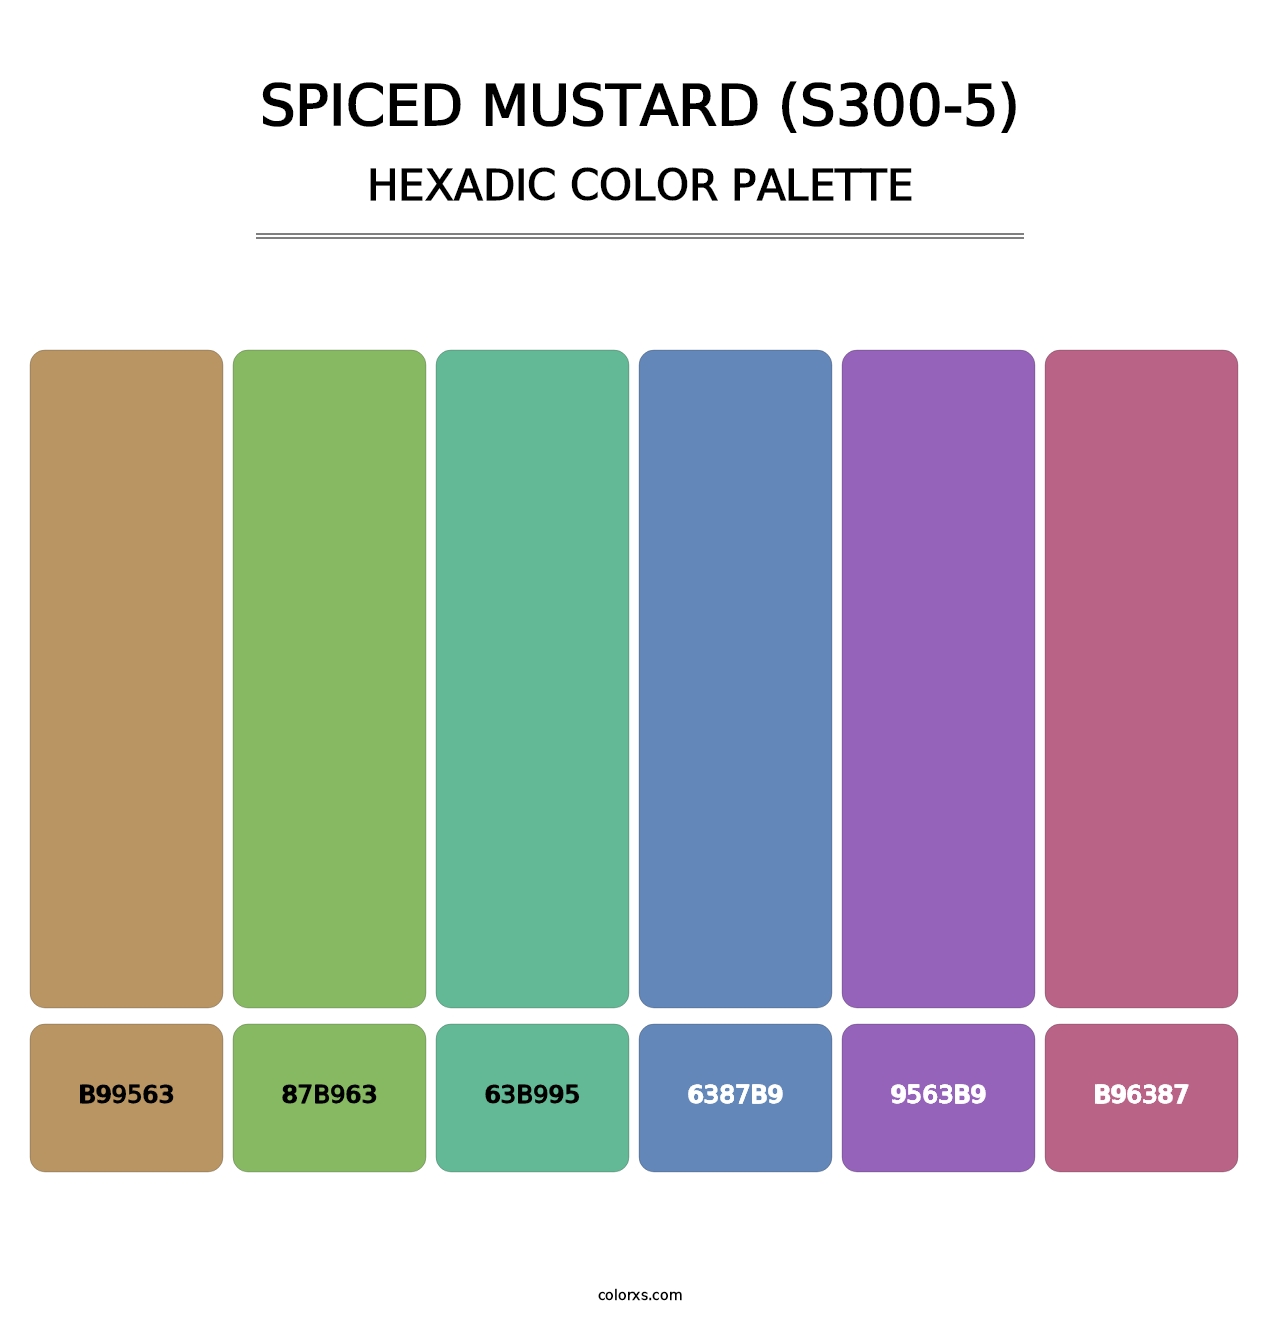 Spiced Mustard (S300-5) - Hexadic Color Palette